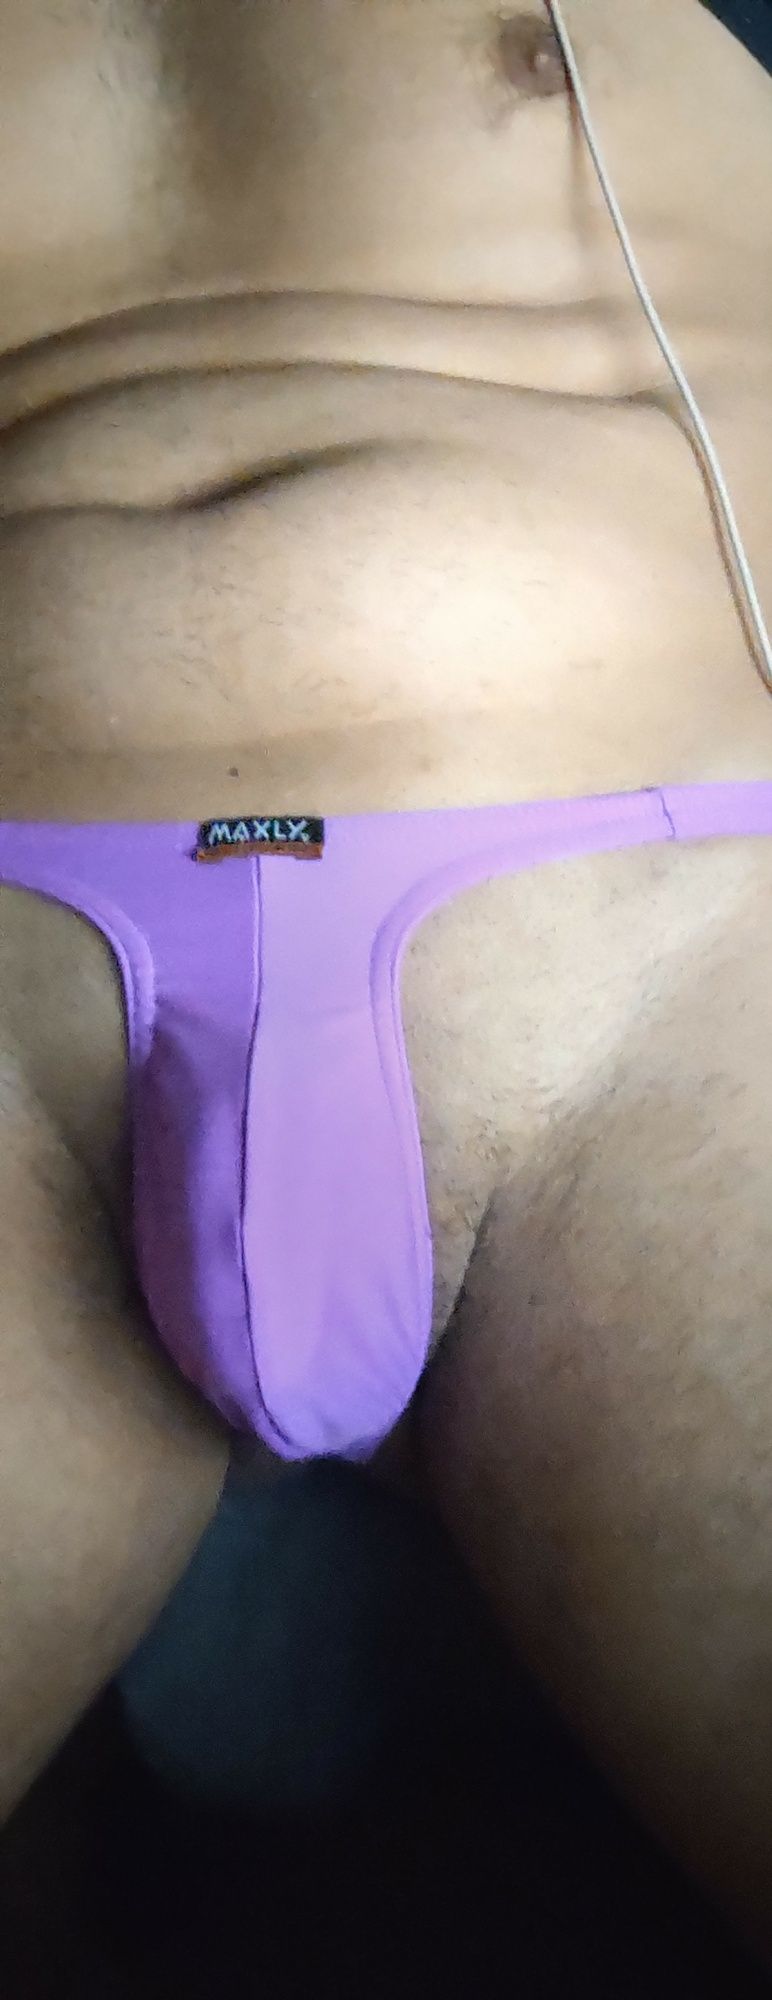 Me in thong